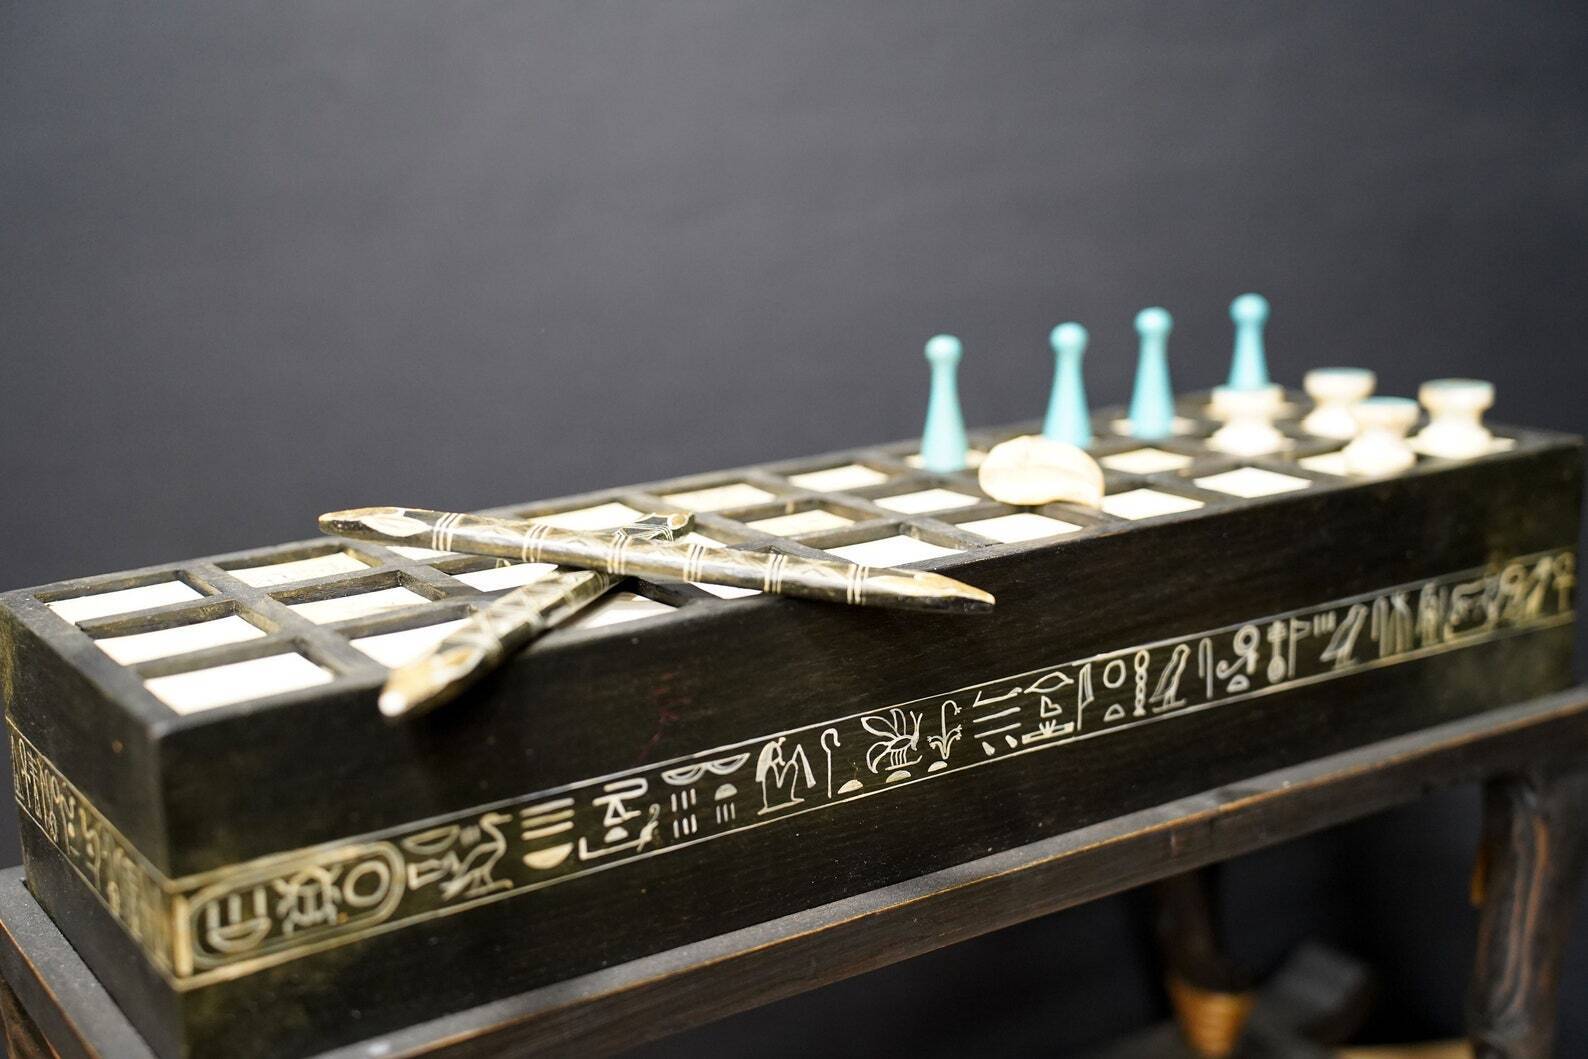 Senet Pharaonic - Ancient Egyptian Board Game of Strategy